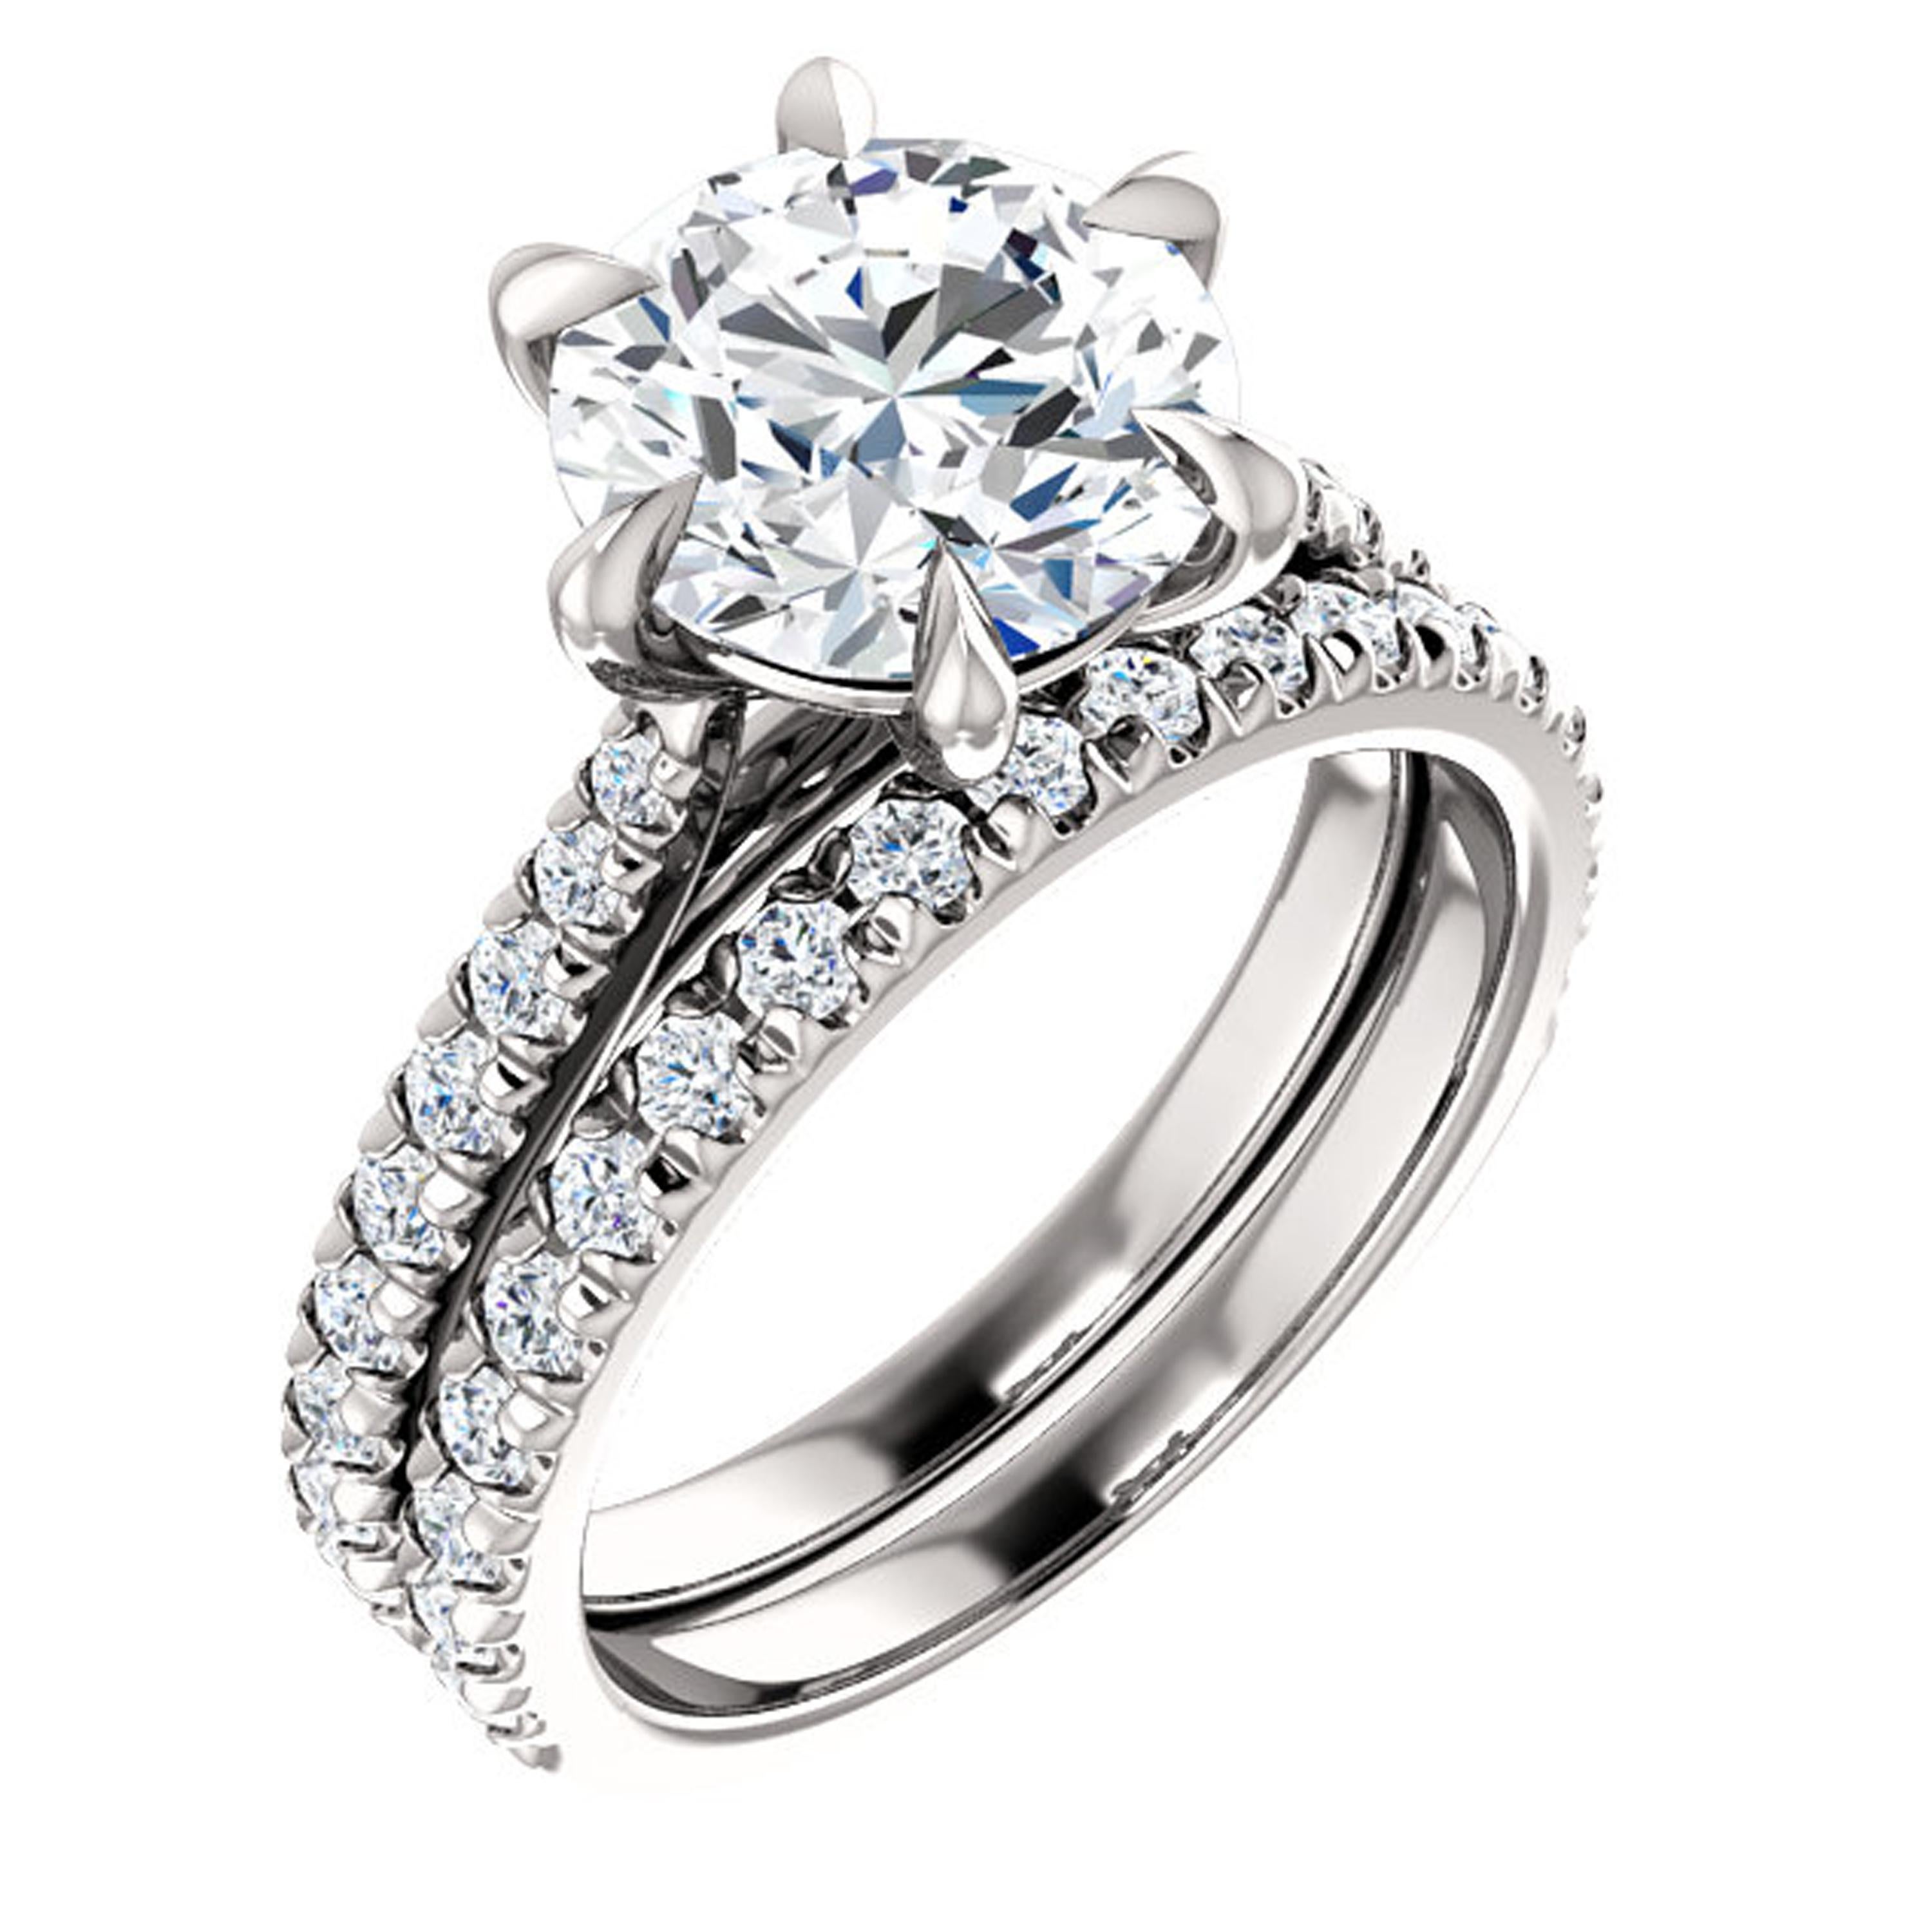 Gorgeous french pavé diamonds adorn the shank of this claw prong engagement ring. French setting allows breathtaking amount of light entering each diamond. Closely set with exposed sides, french pave setting creates maximum shine and brilliance.